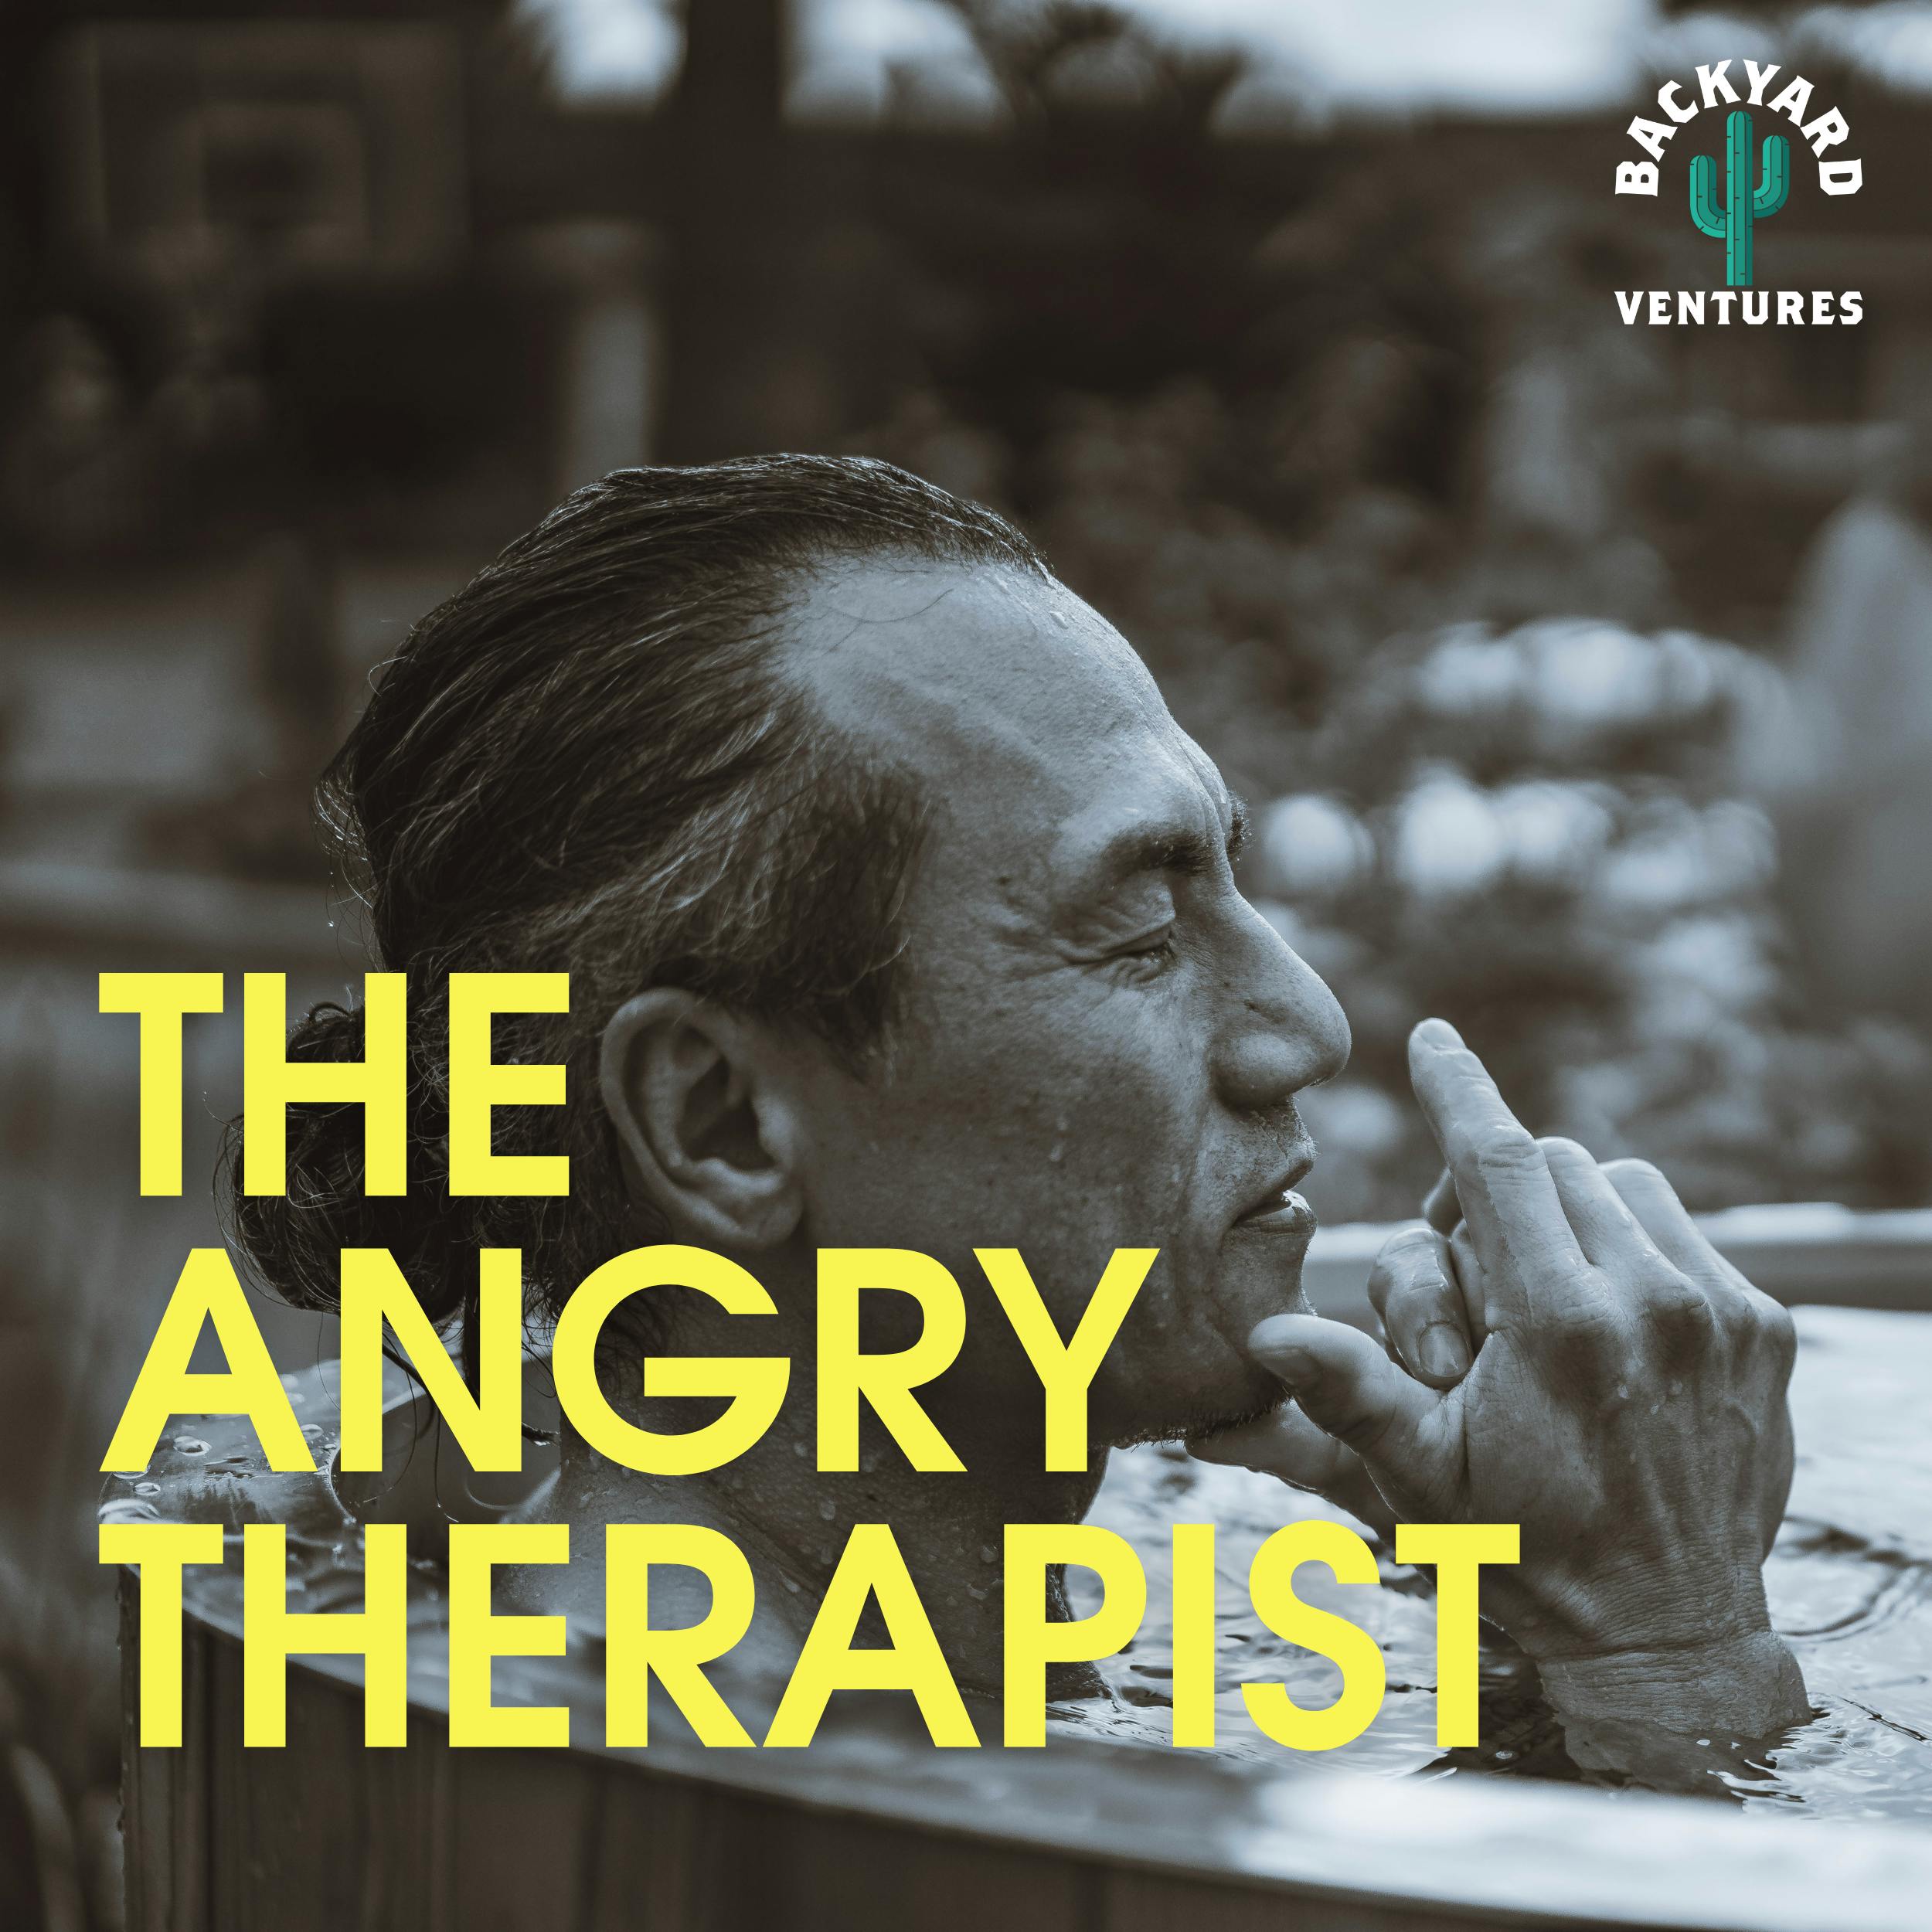 The Angry Therapist Podcast